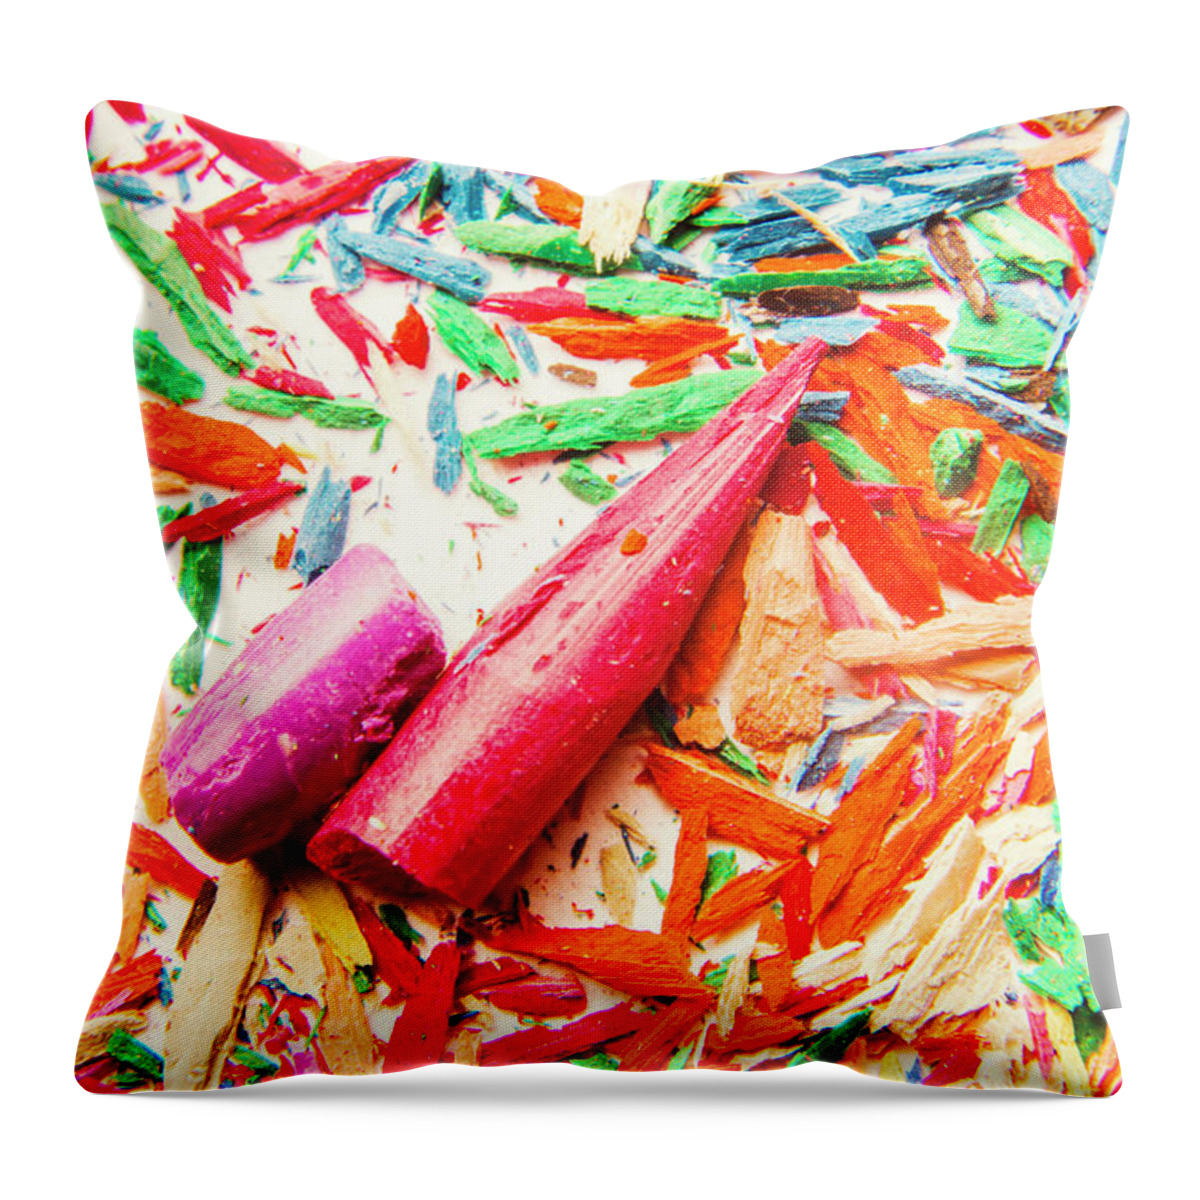 Artwork Throw Pillow featuring the photograph Artistic disruption by Jorgo Photography